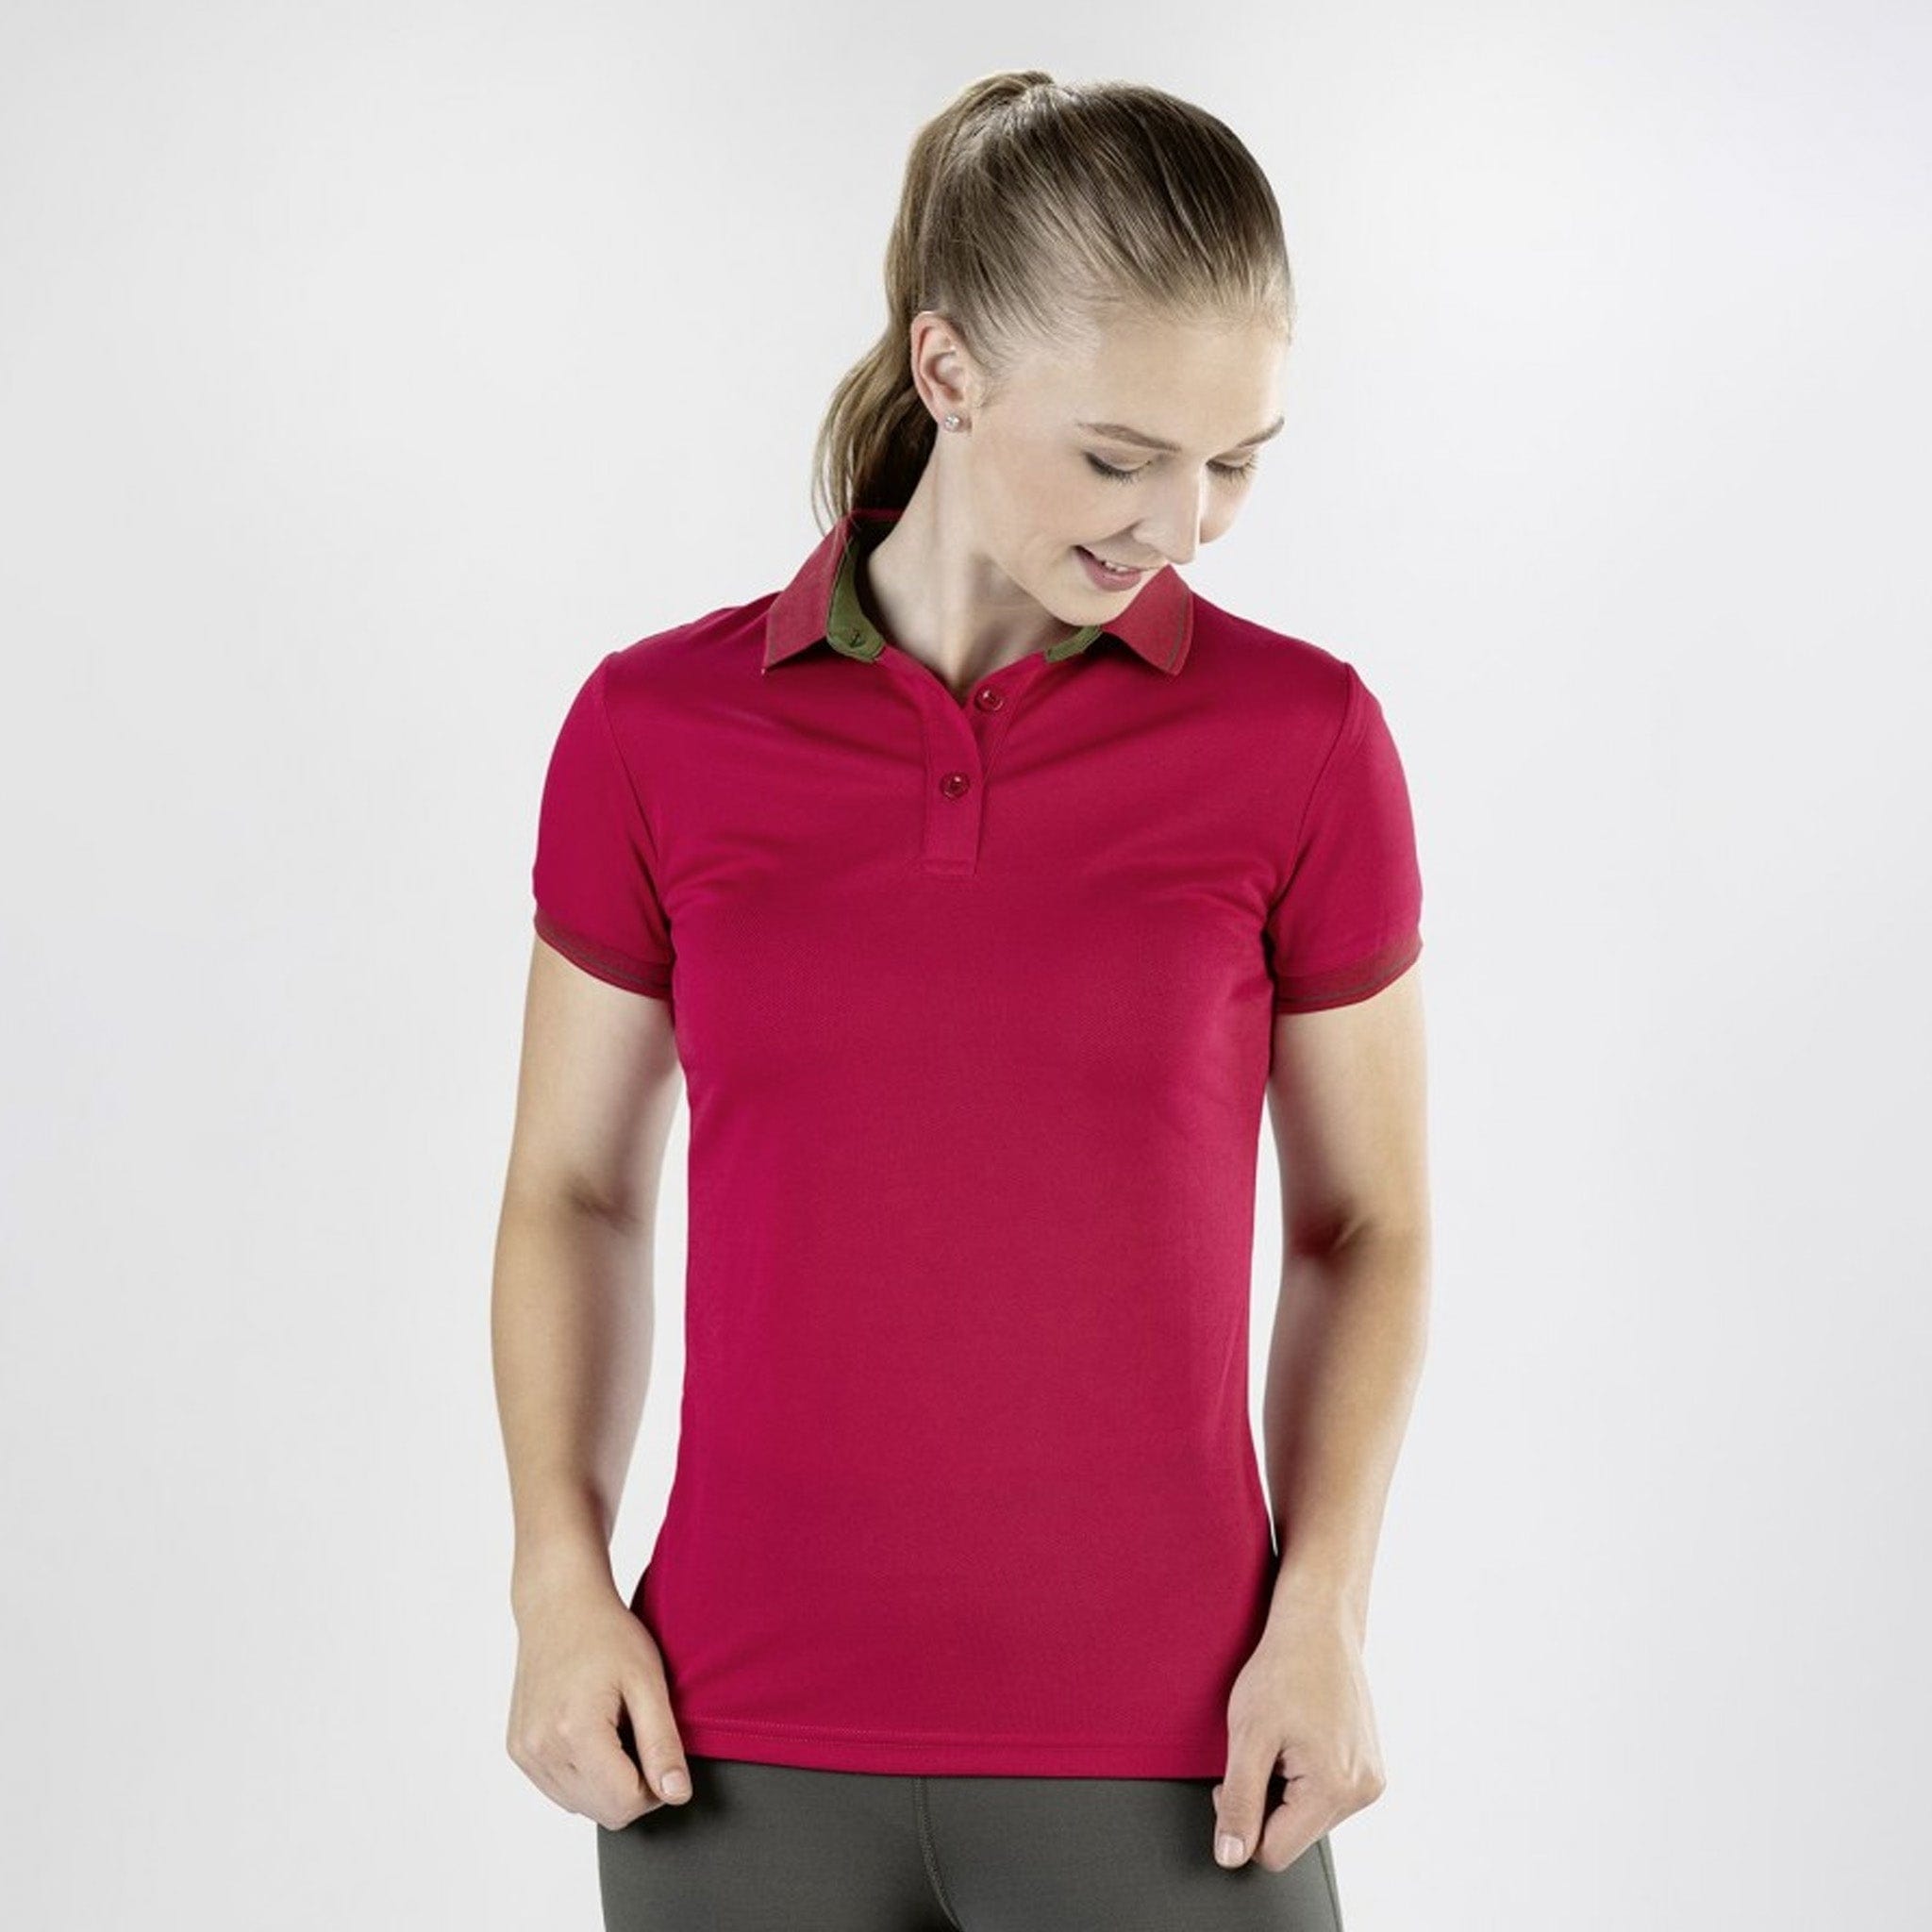 HKM Children's Classico Polo Shirt 11319 Cranberry Front On Model